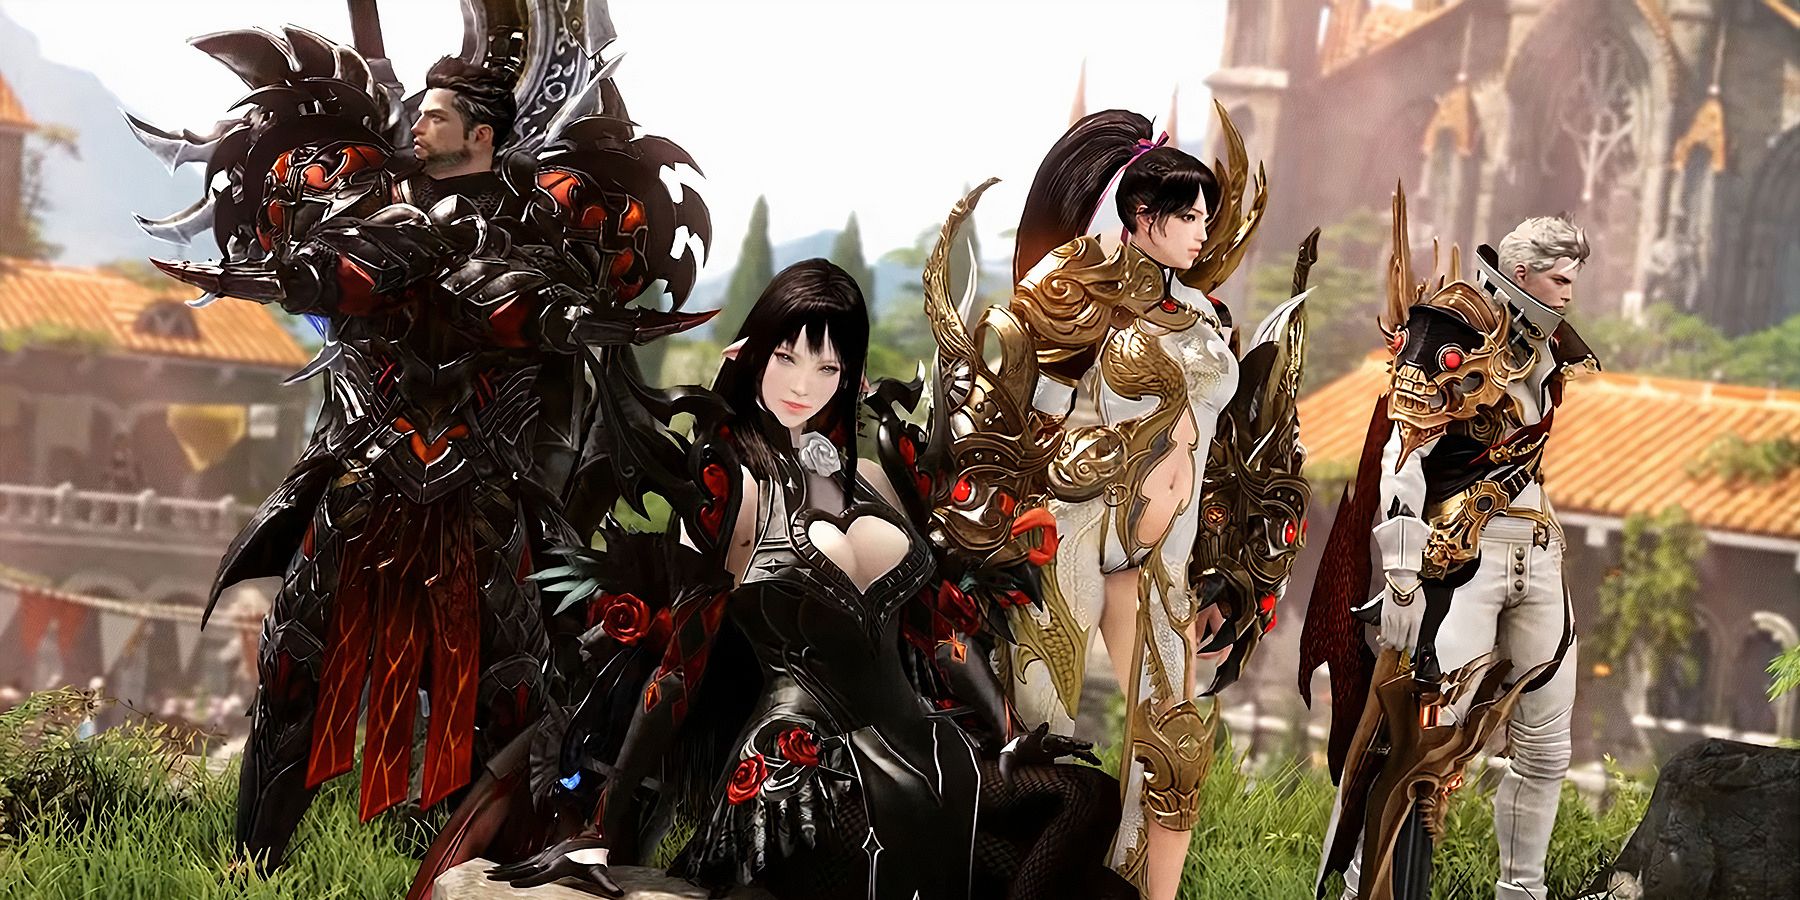 Lineup of characters from Lost Ark